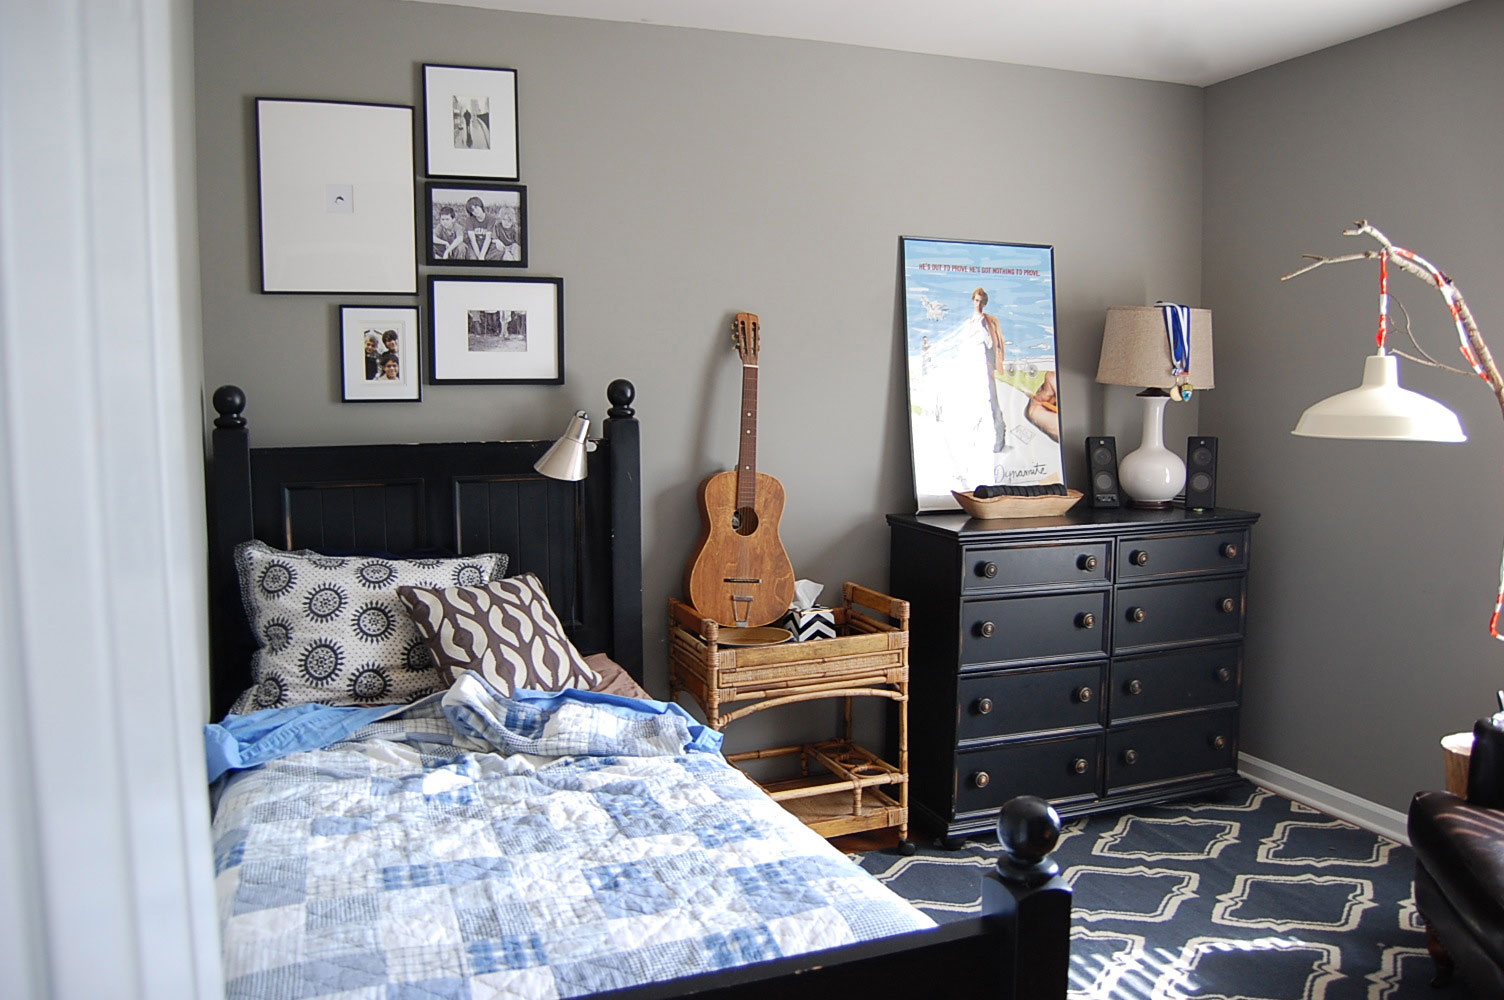 Boys Room Using Small Boys Room Paint Ideas Using Grey Wall Color With Traditional Bedroom Furniture Using Black Wooden Material Kids Room Boys Room Paint Ideas For Adventurous Imagination